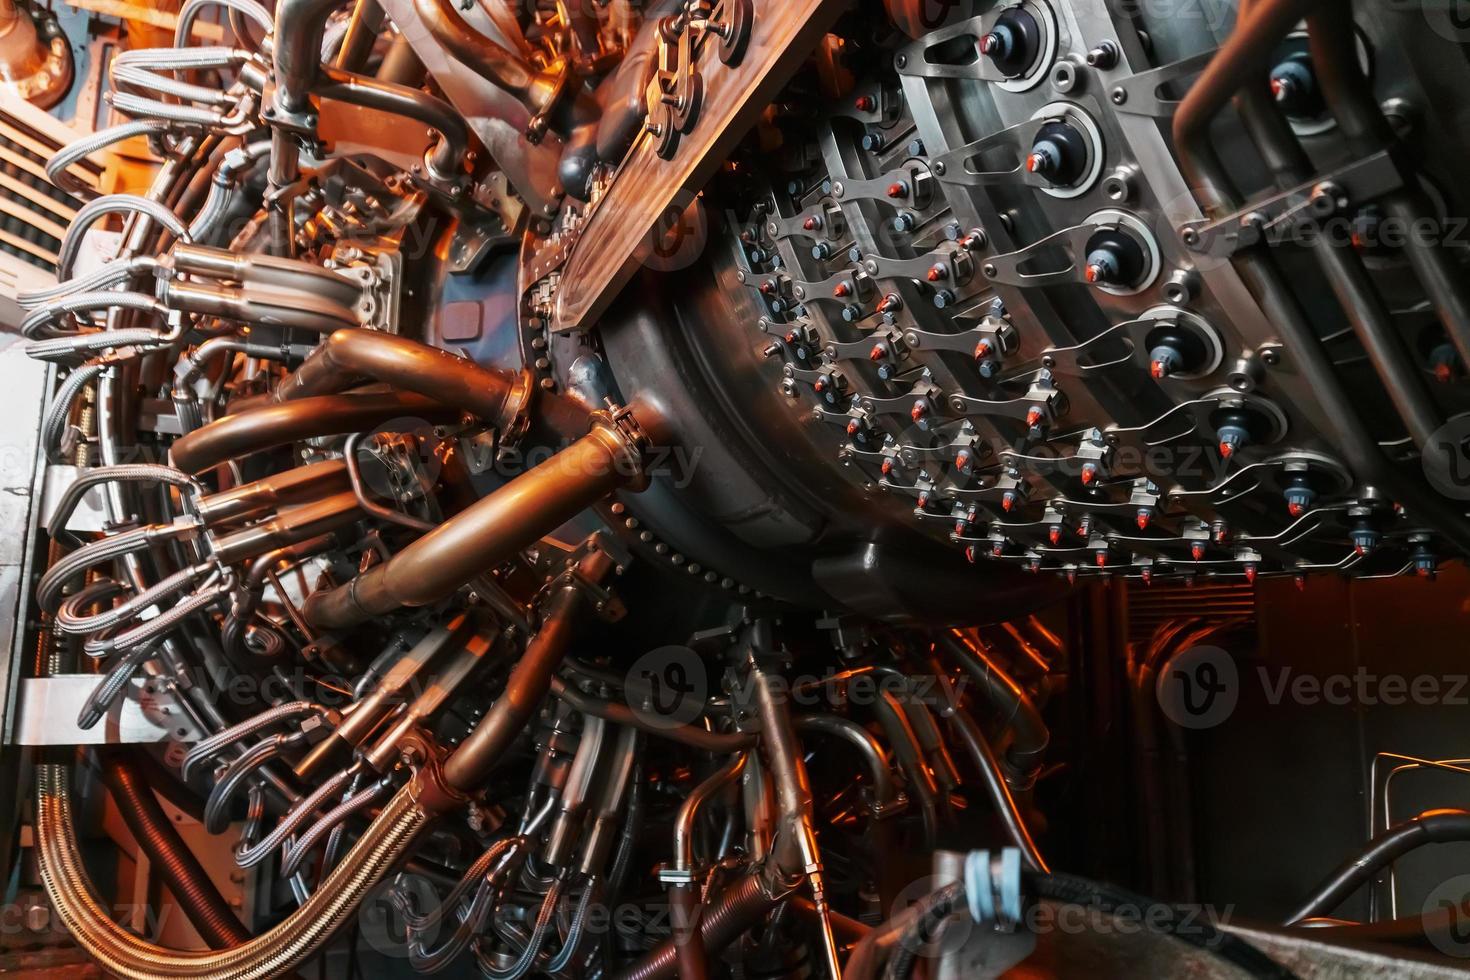 Parts of the operational gas turbine engine of a jet aircraft photo